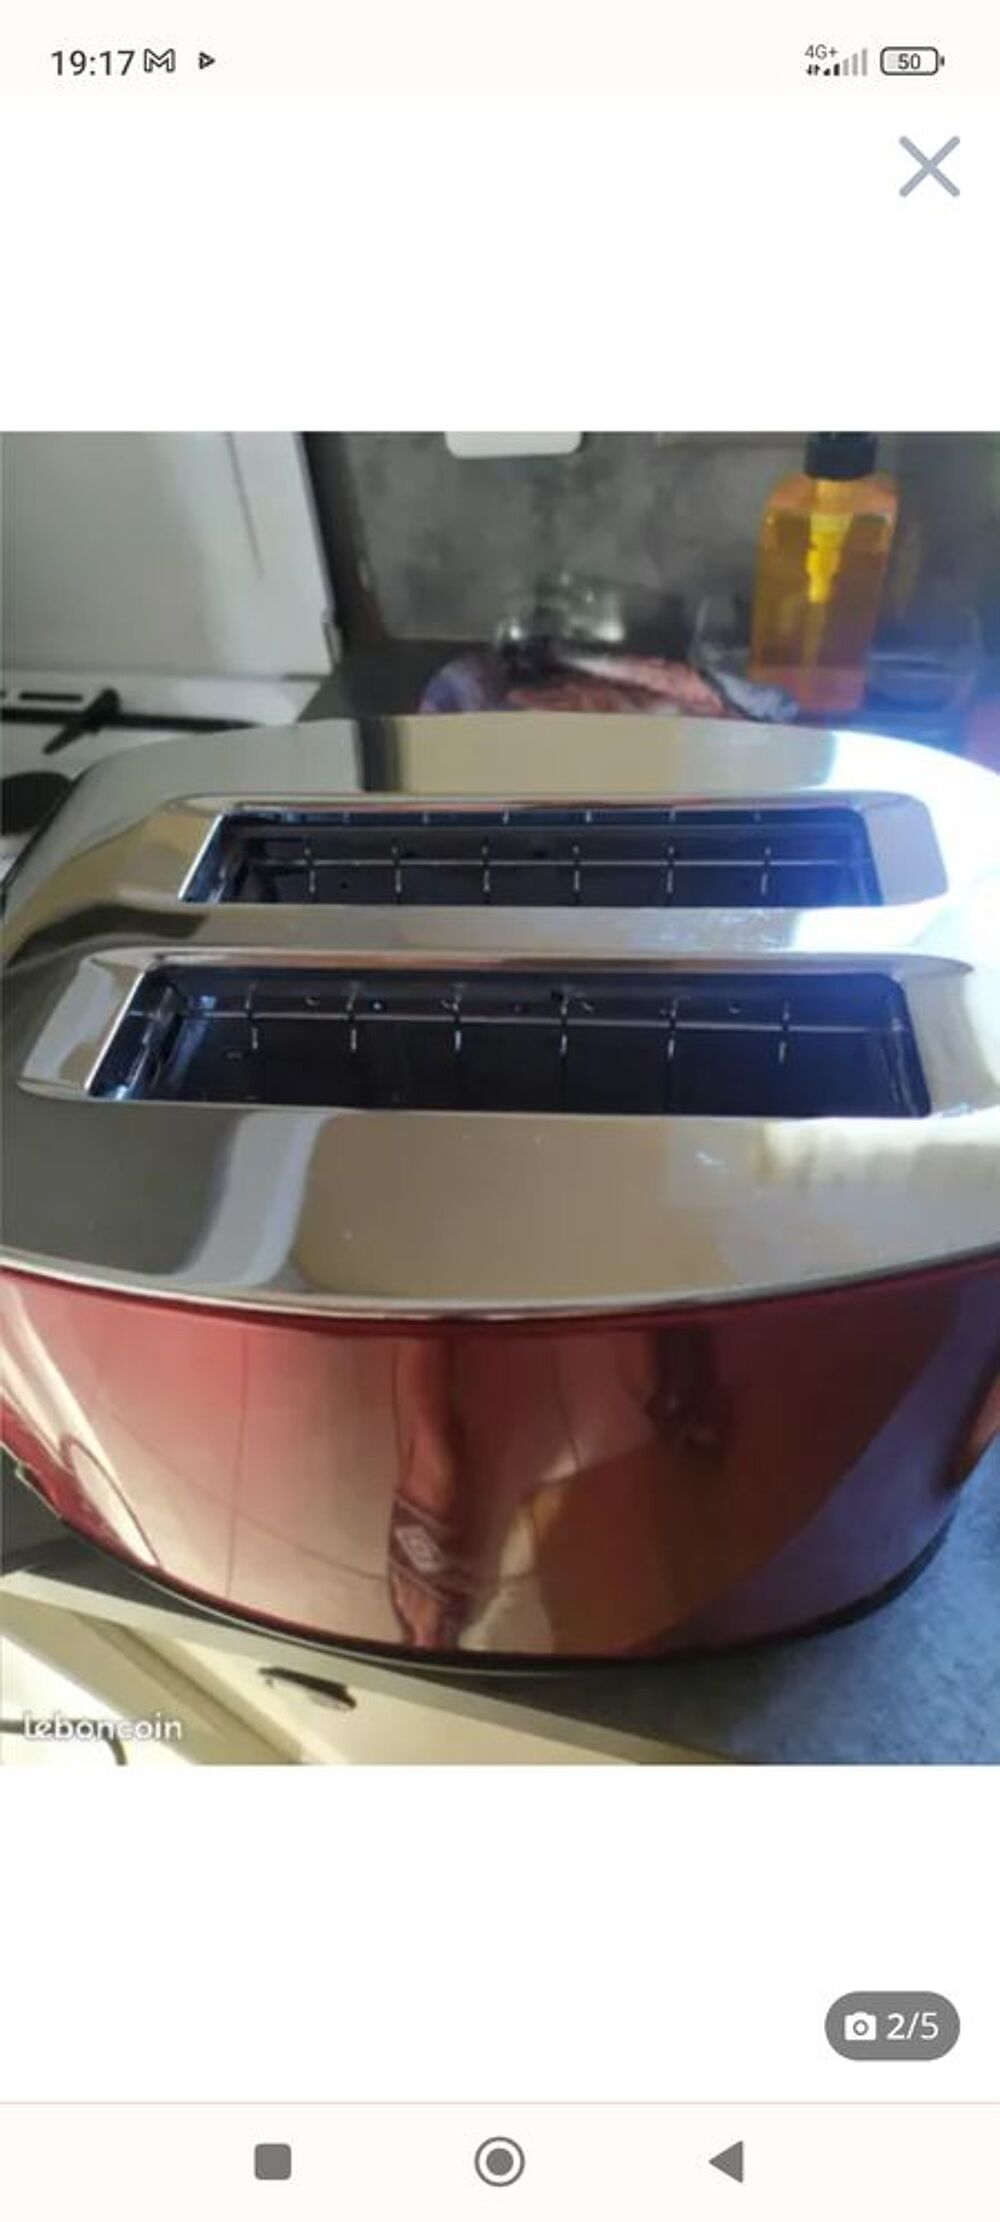 Grille pain Russell Hobbs Rouge Rubis/ Inox Bross&eacute; Electromnager